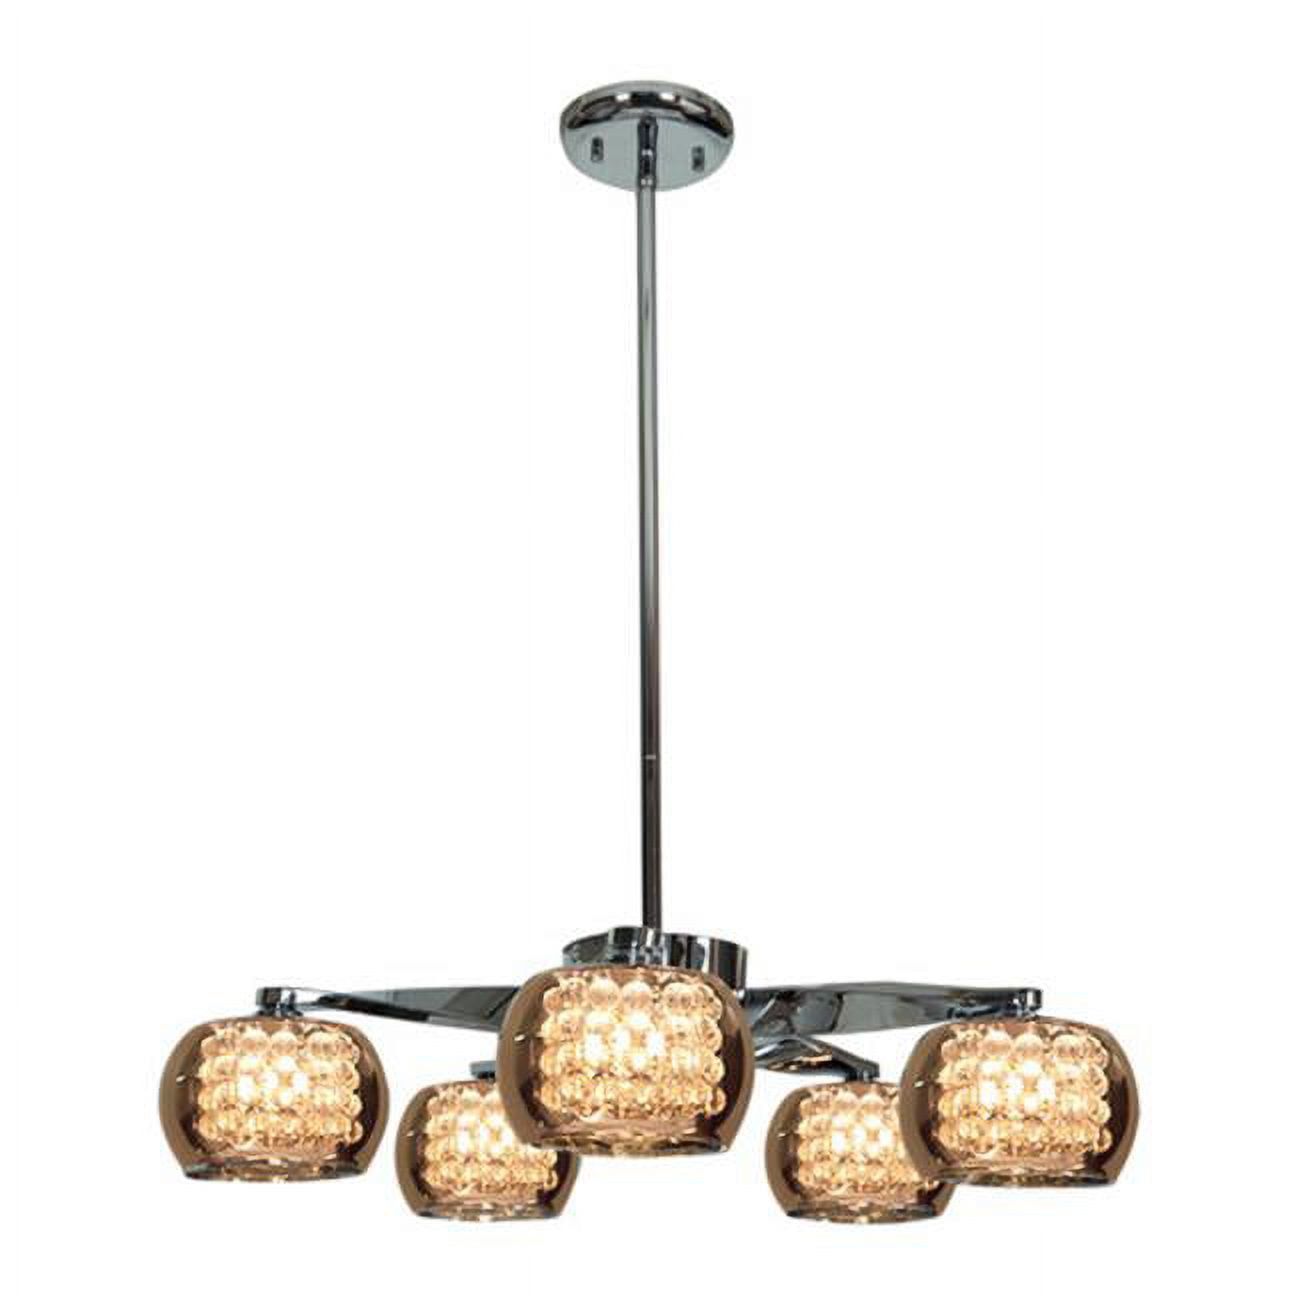 Picture of Access Lighting 52120-CH-MIR 23 in. Glam 5 Light Chrome Chandelier Ceiling Light